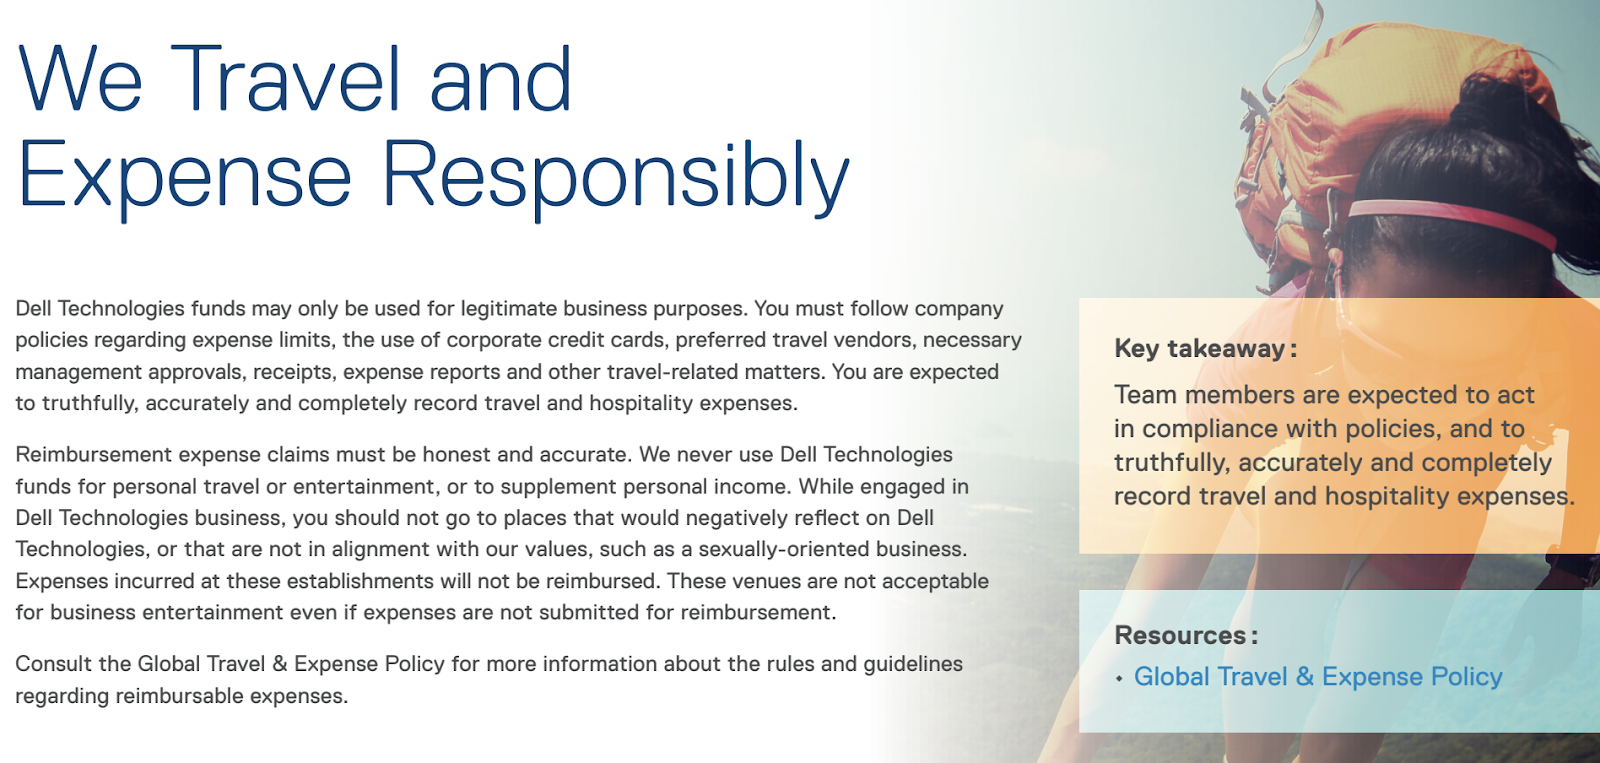 Employee corporate travel policy example: Dell Technologies